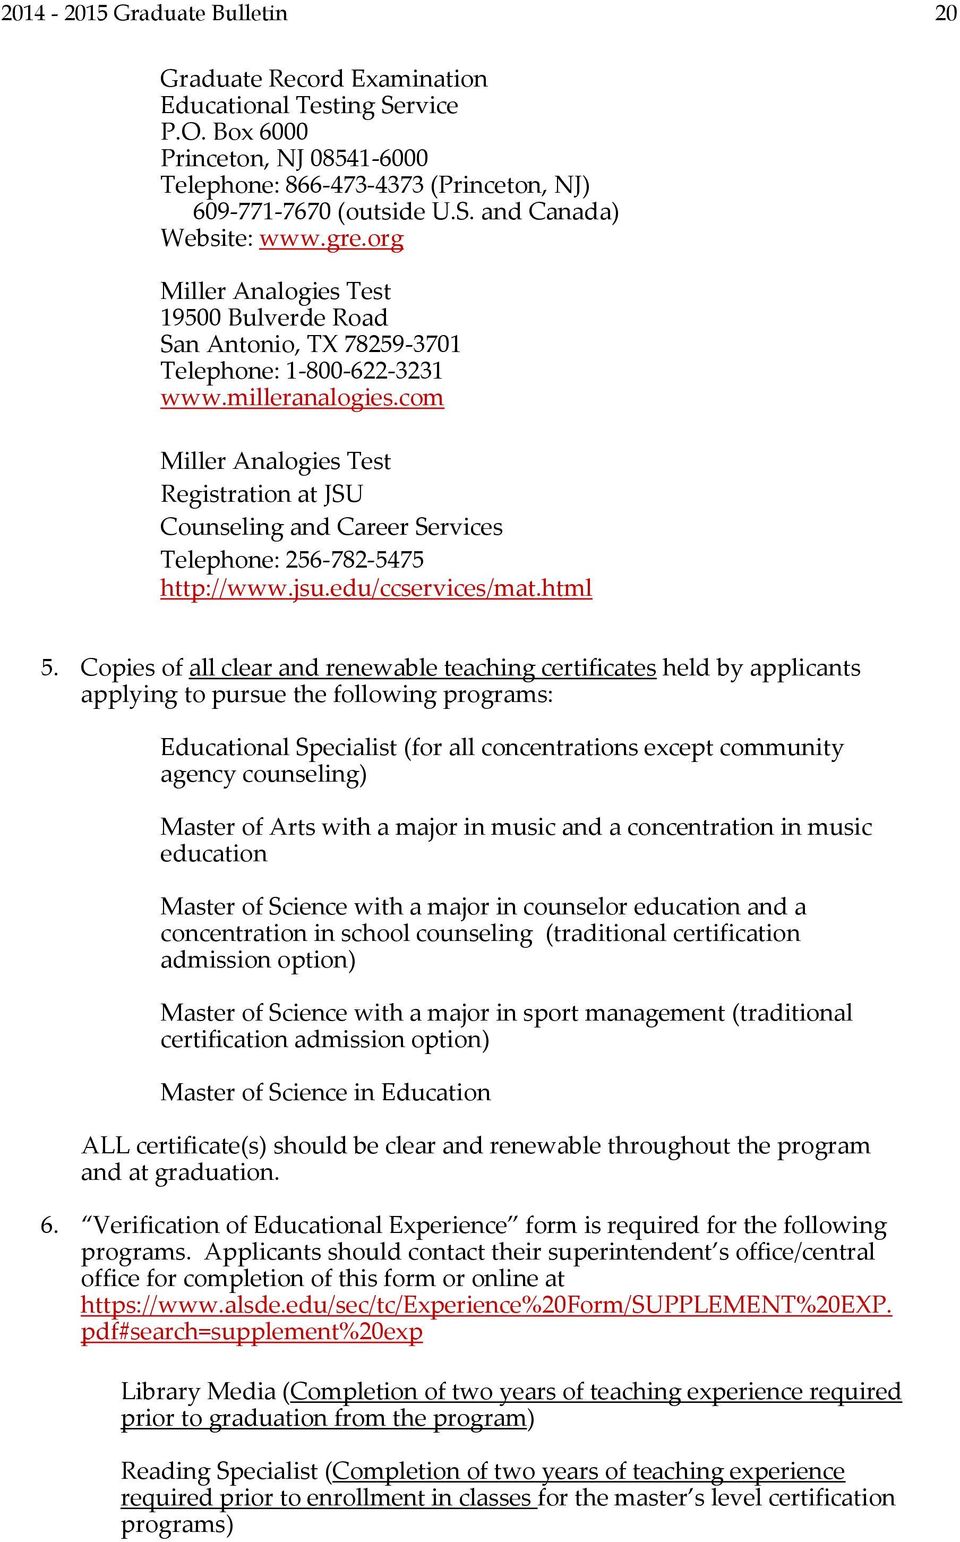 com Miller Analogies Test Registration at JSU Counseling and Career Services Telephone: 256-782-5475 http://www.jsu.edu/ccservices/mat.html 5.